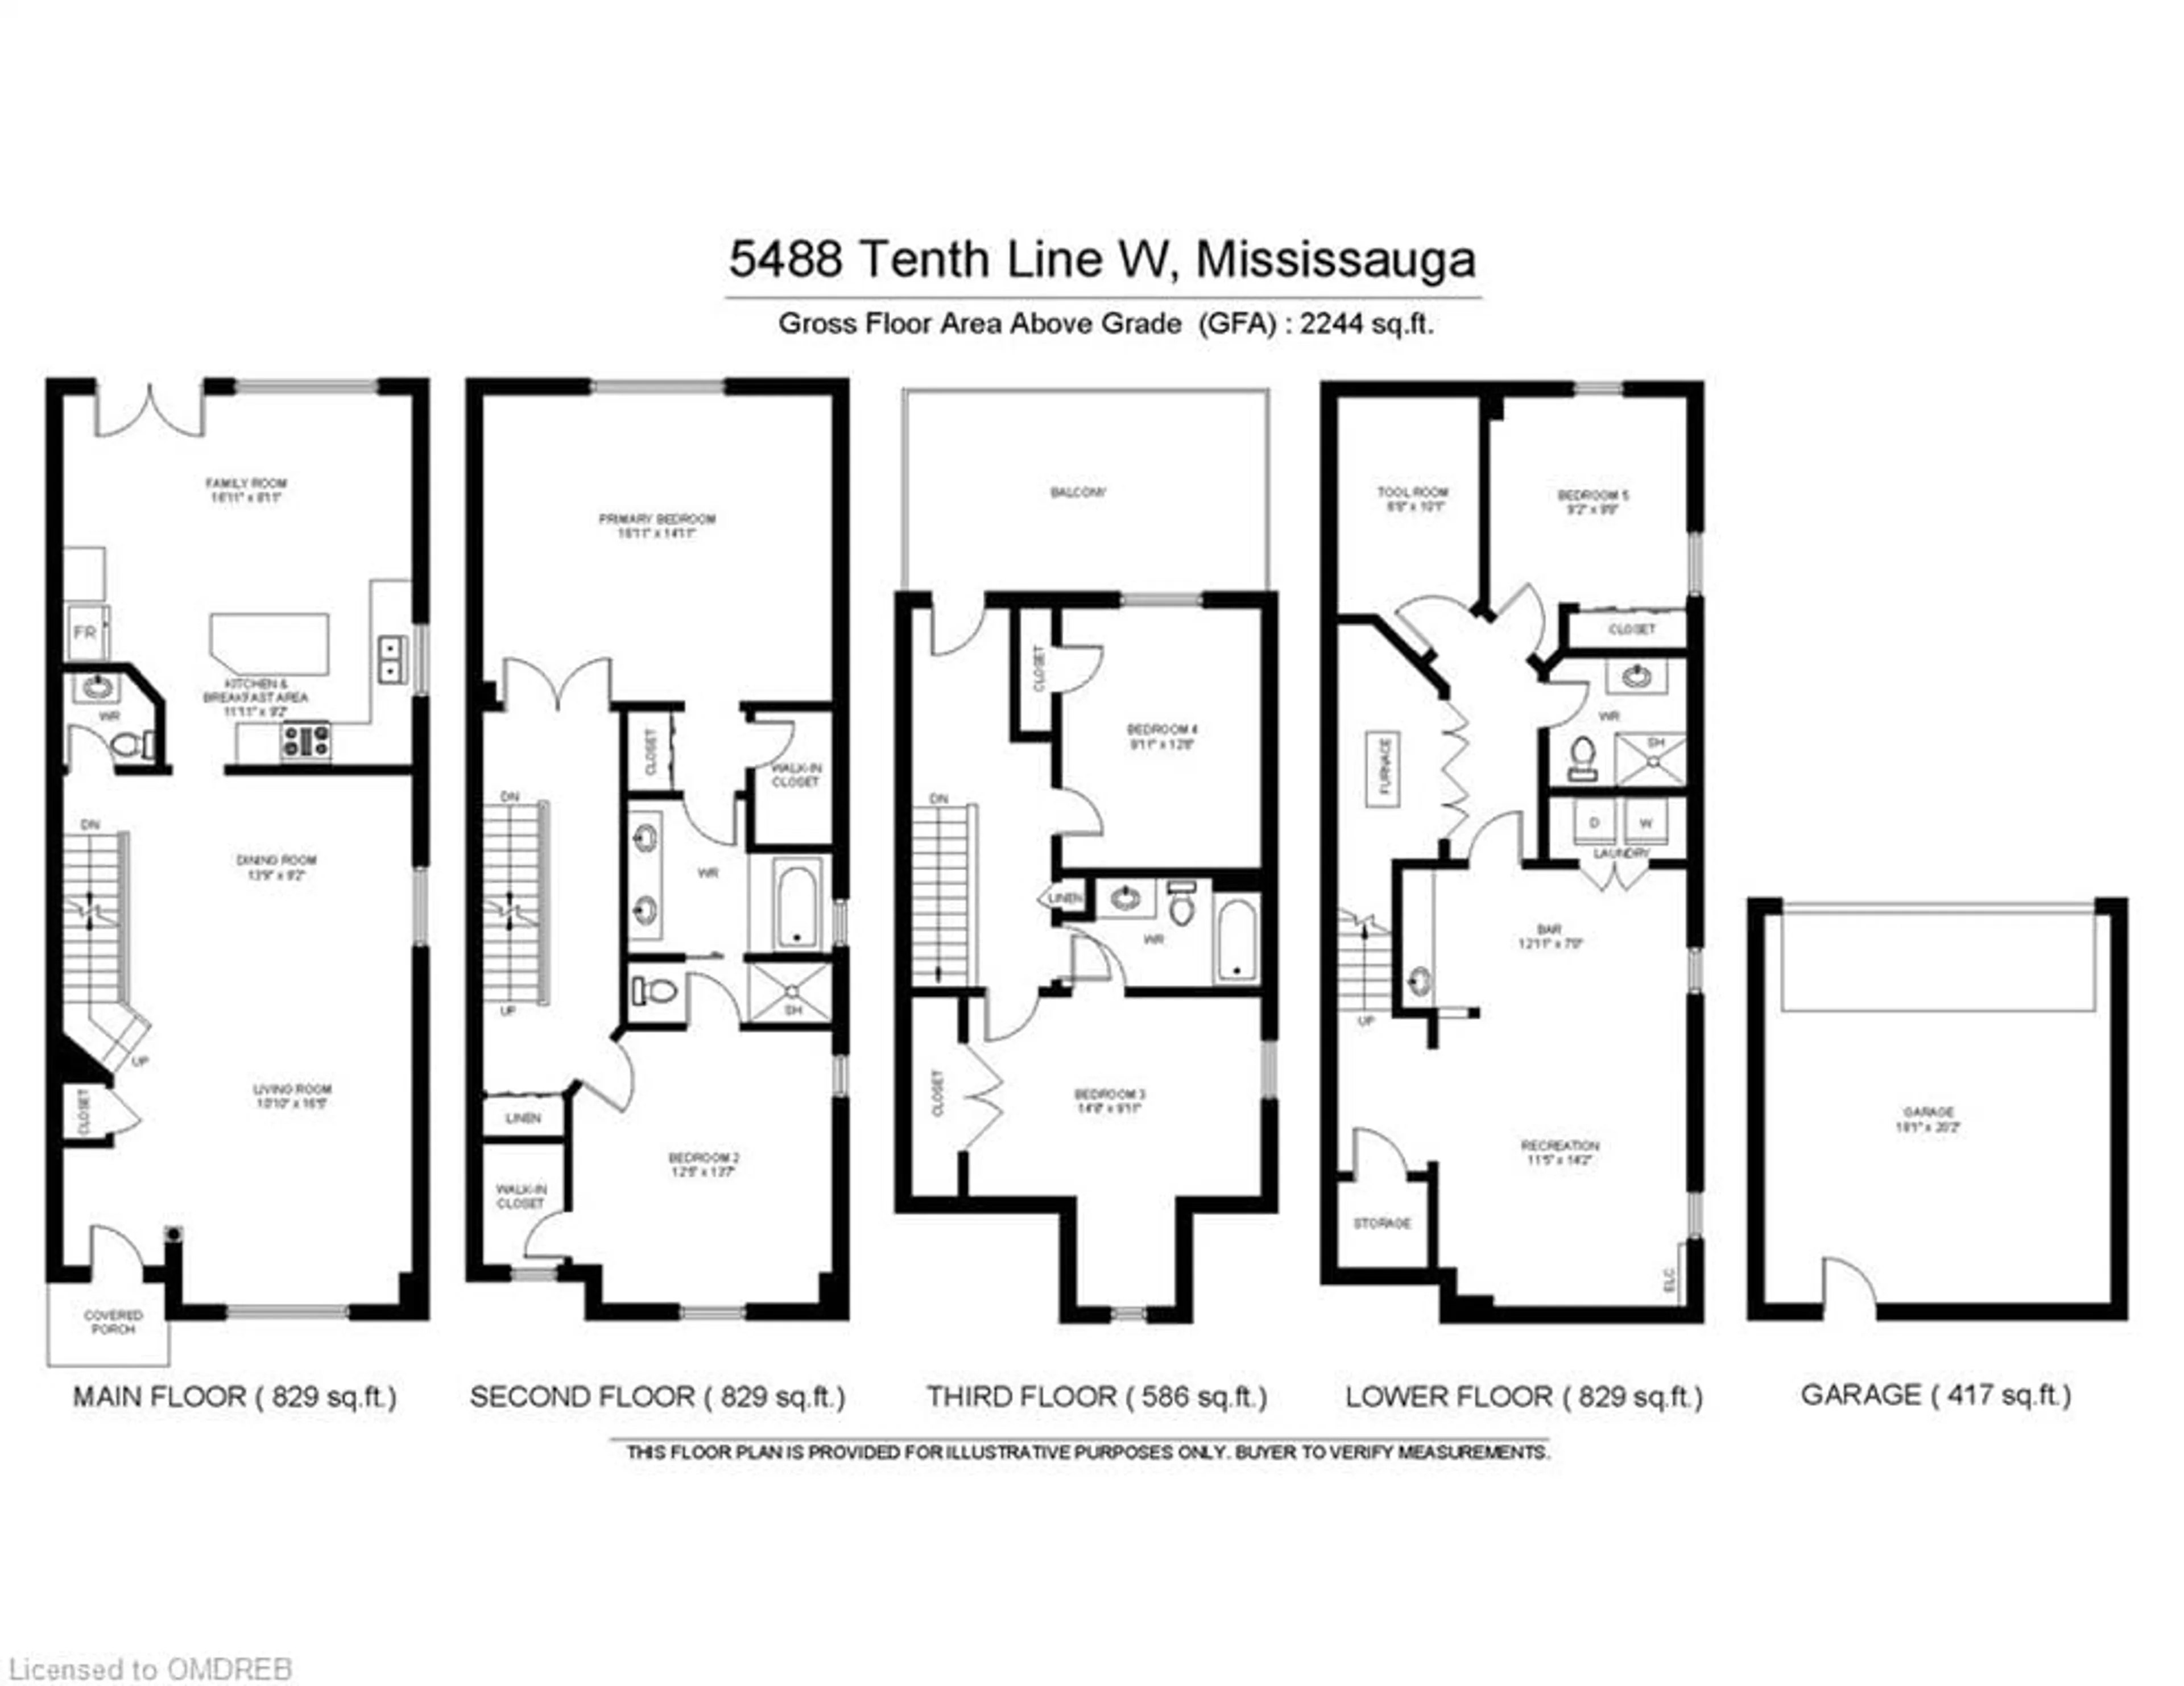 Floor plan for 5488 Tenth Line, Mississauga Ontario L5M 0G5